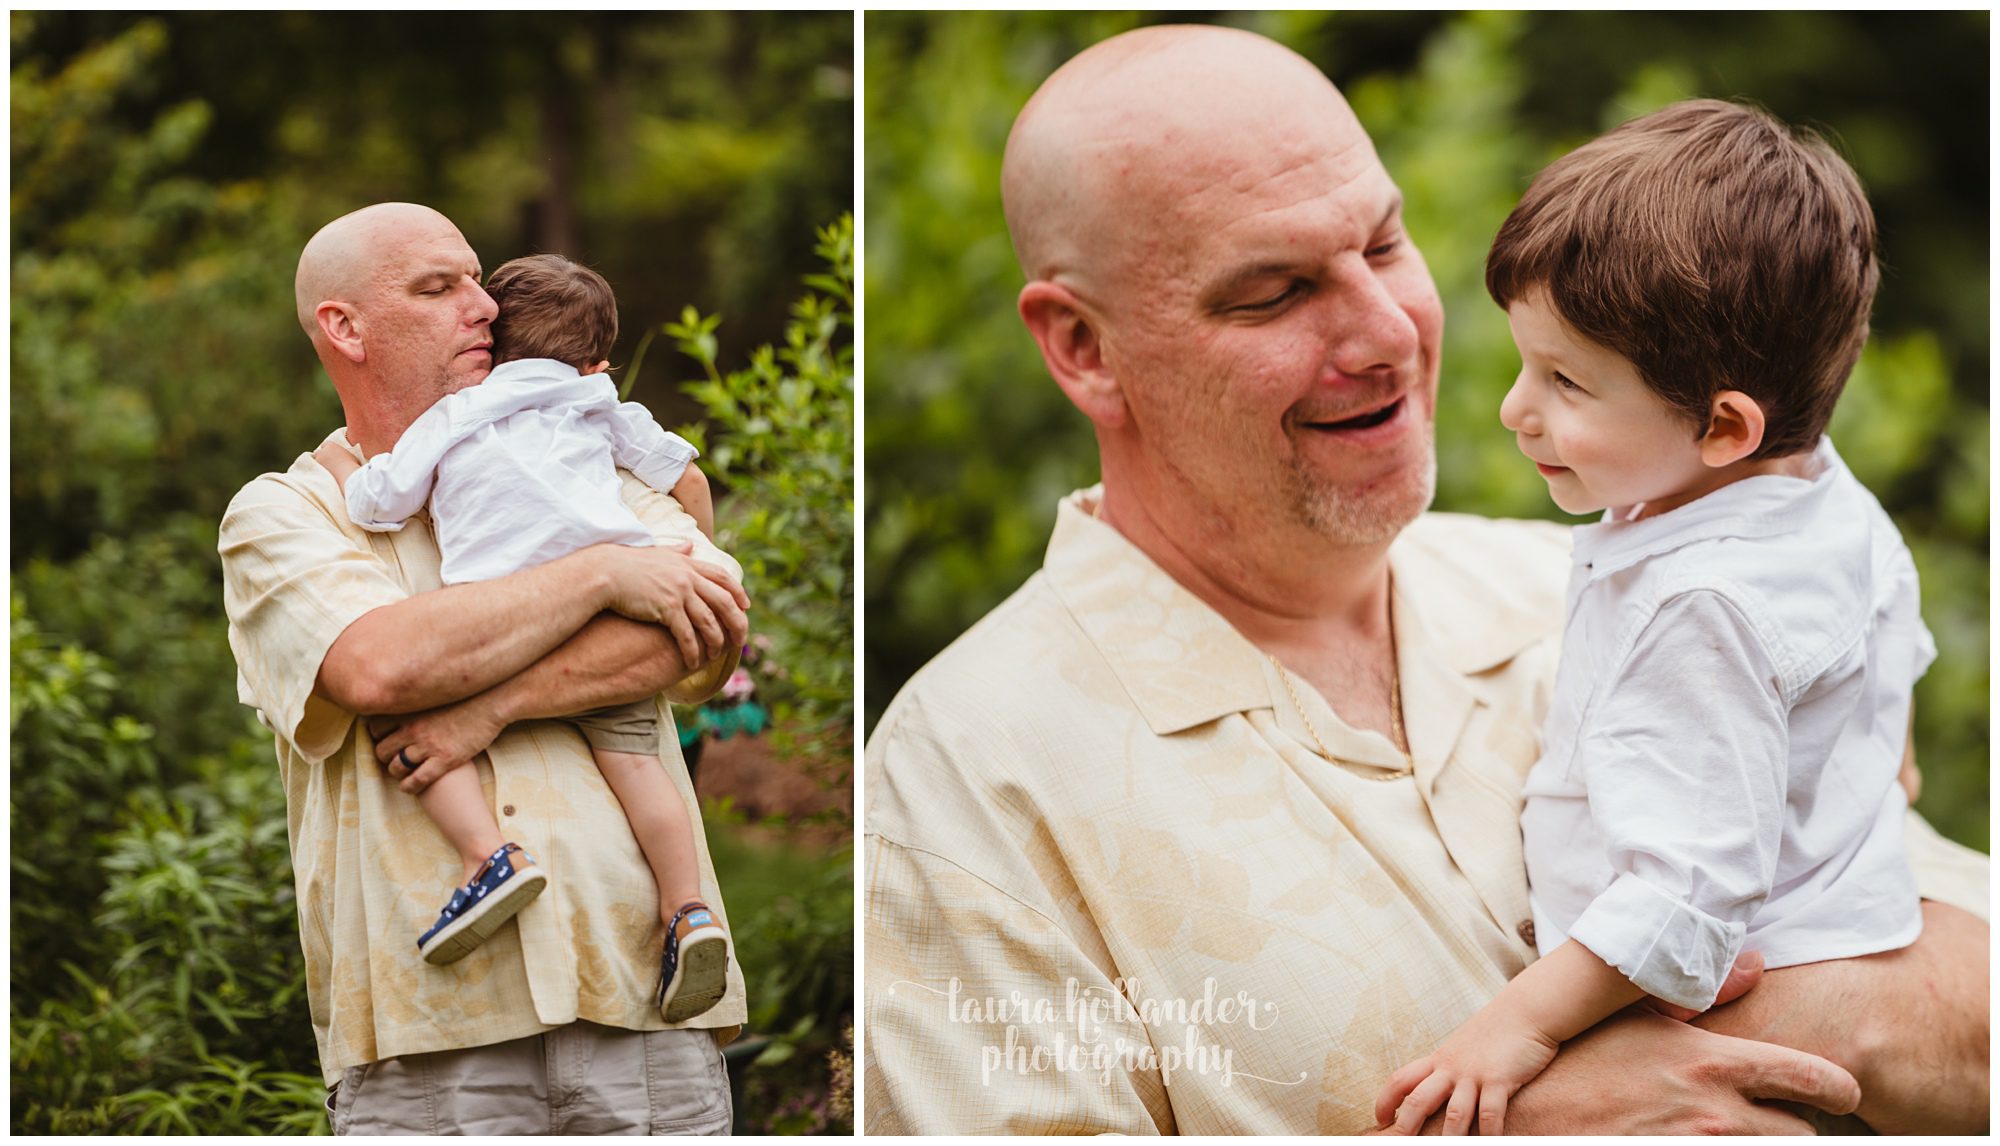 daddy and son photo inspiration at Southern Exposure in Battle Creek, MI